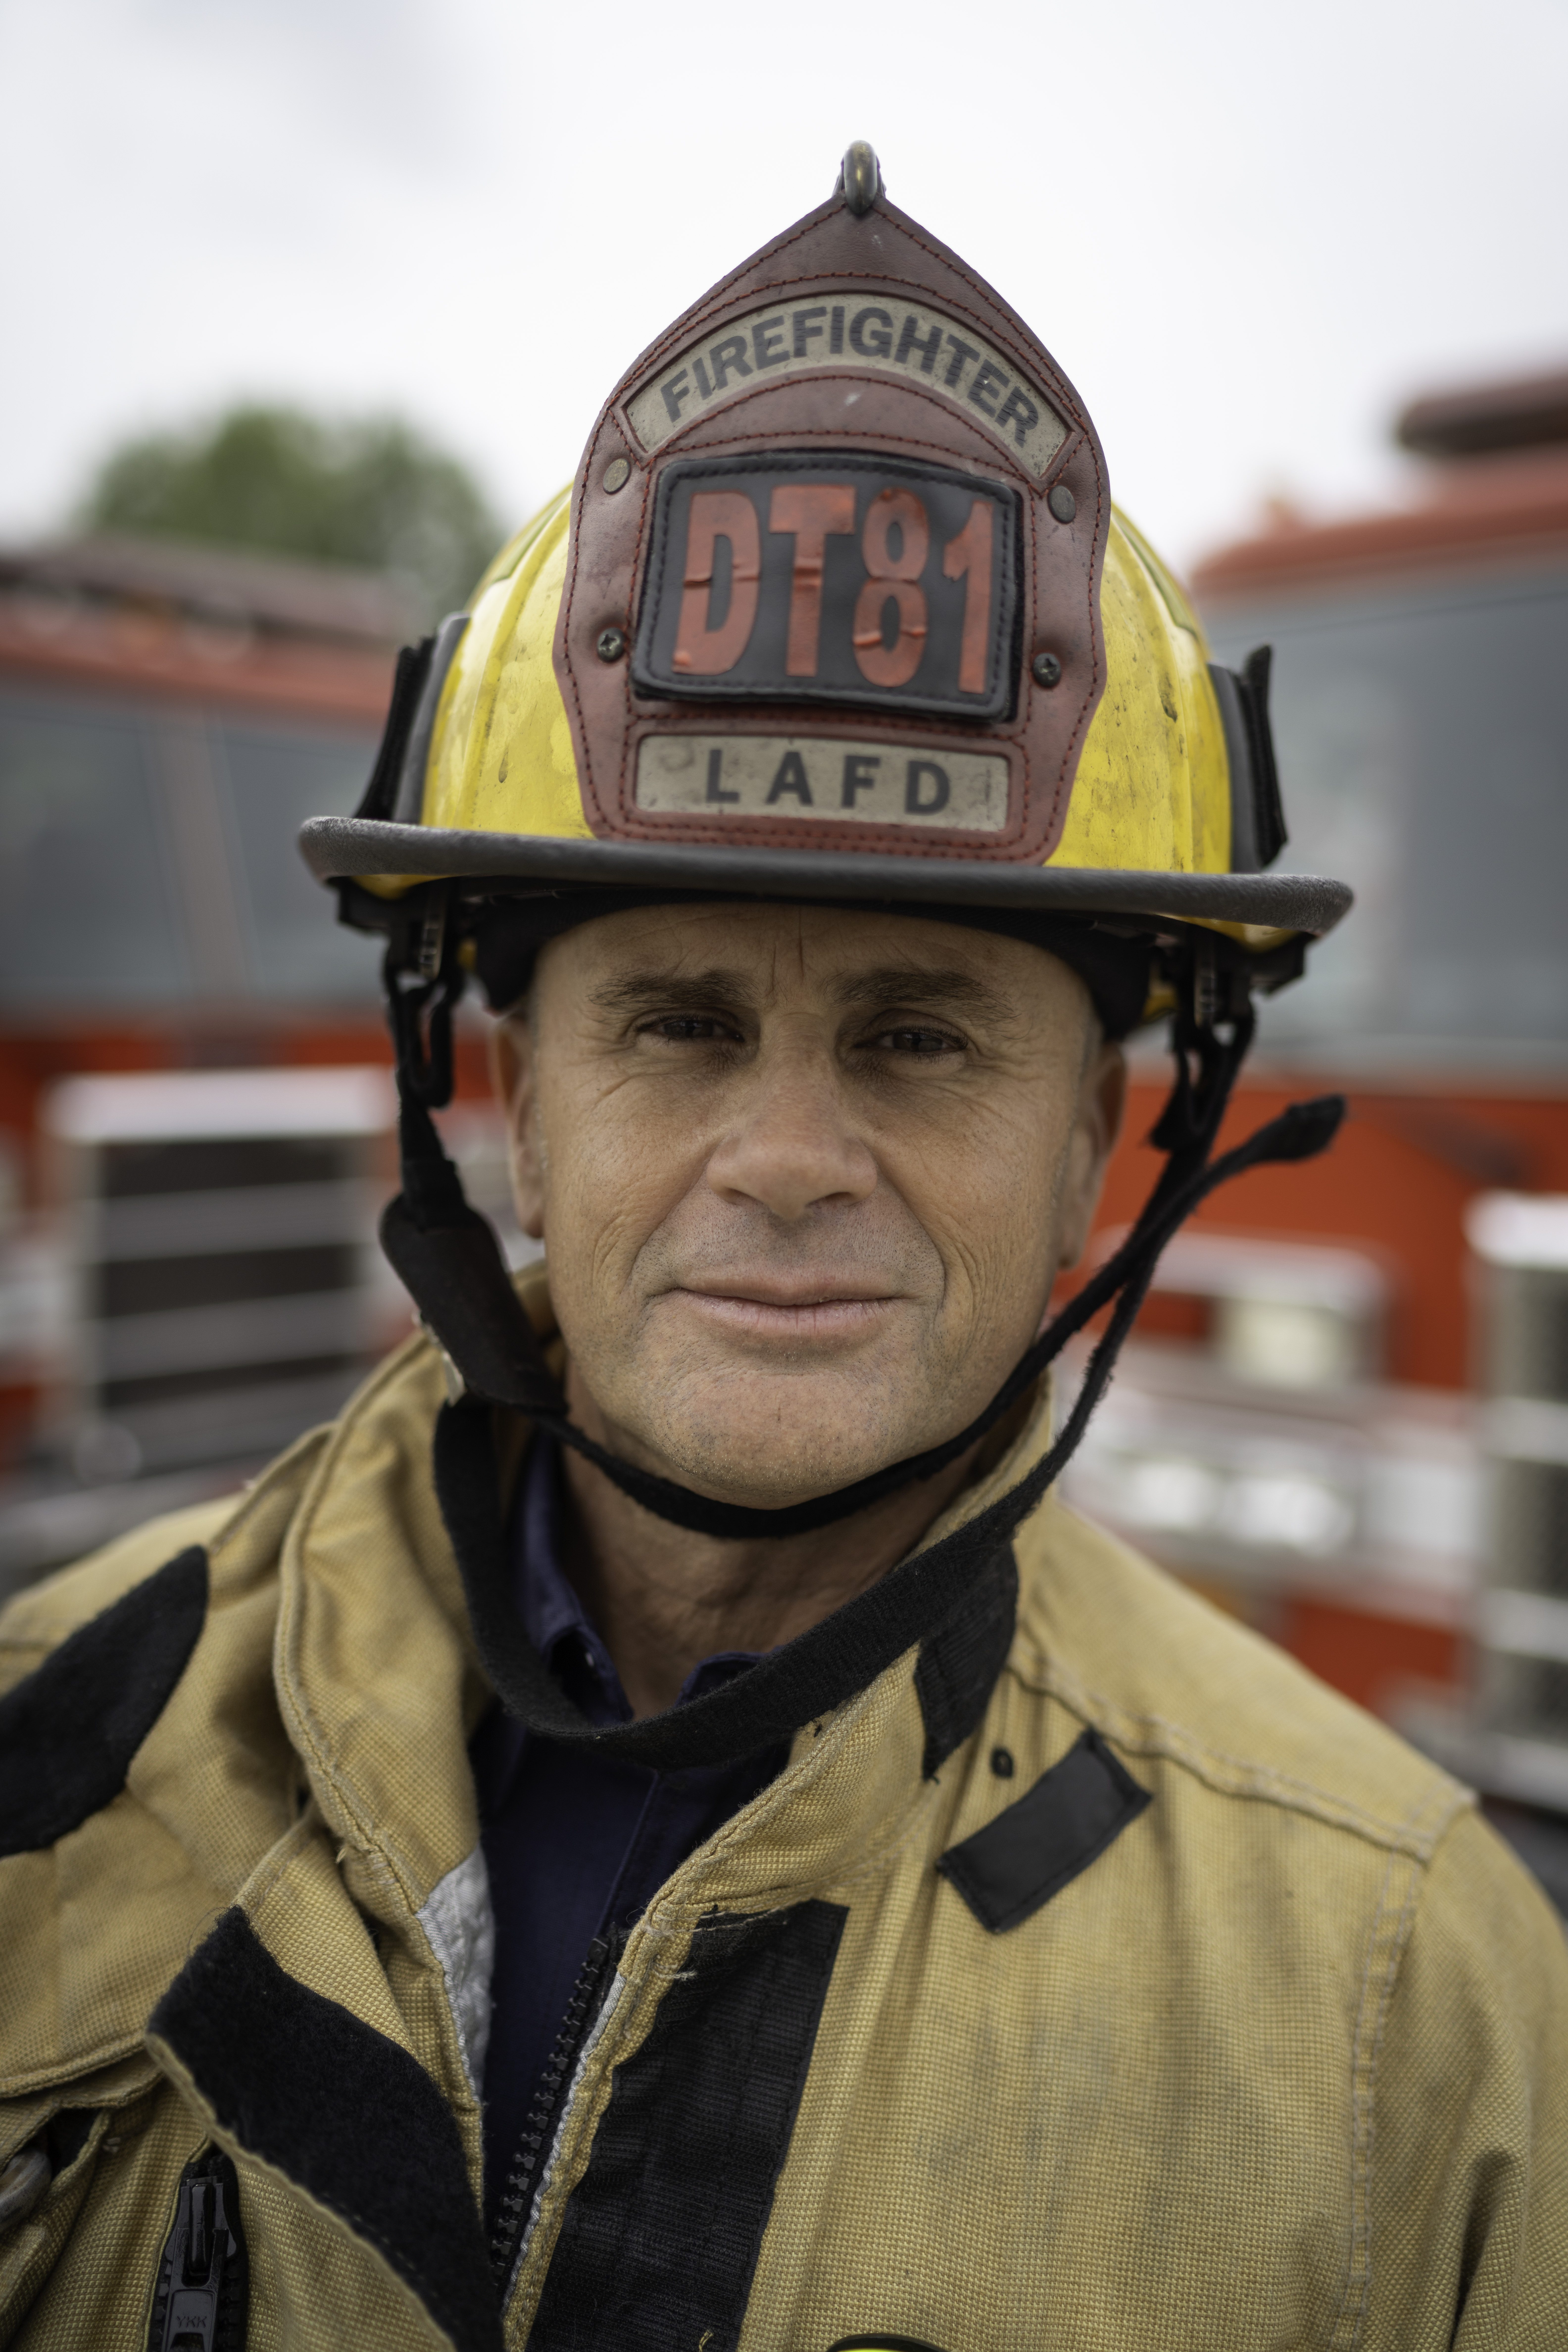 The 52-year-old now juggles life as a firefighter with being a single dad-of-four